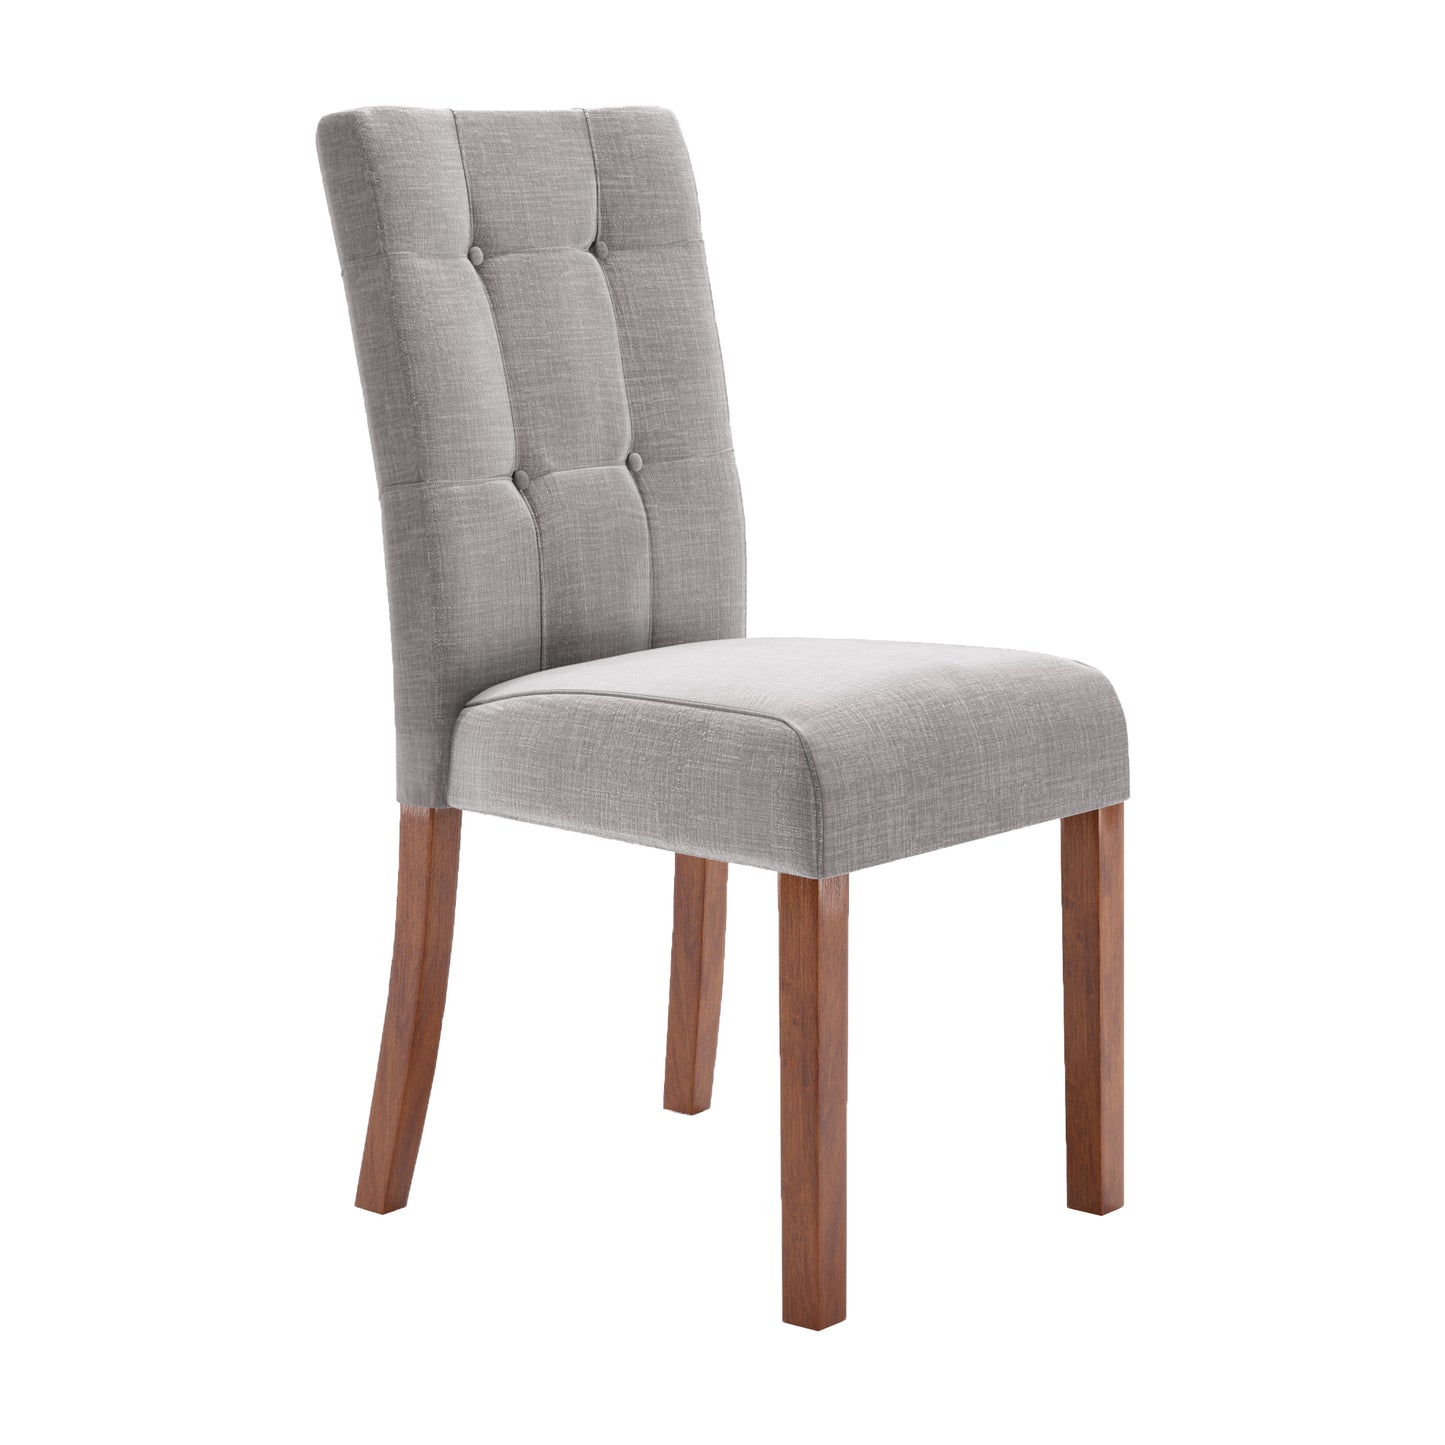 Cherry Finish Upholstered Dining Chairs (Set of 2) - Grey Linen